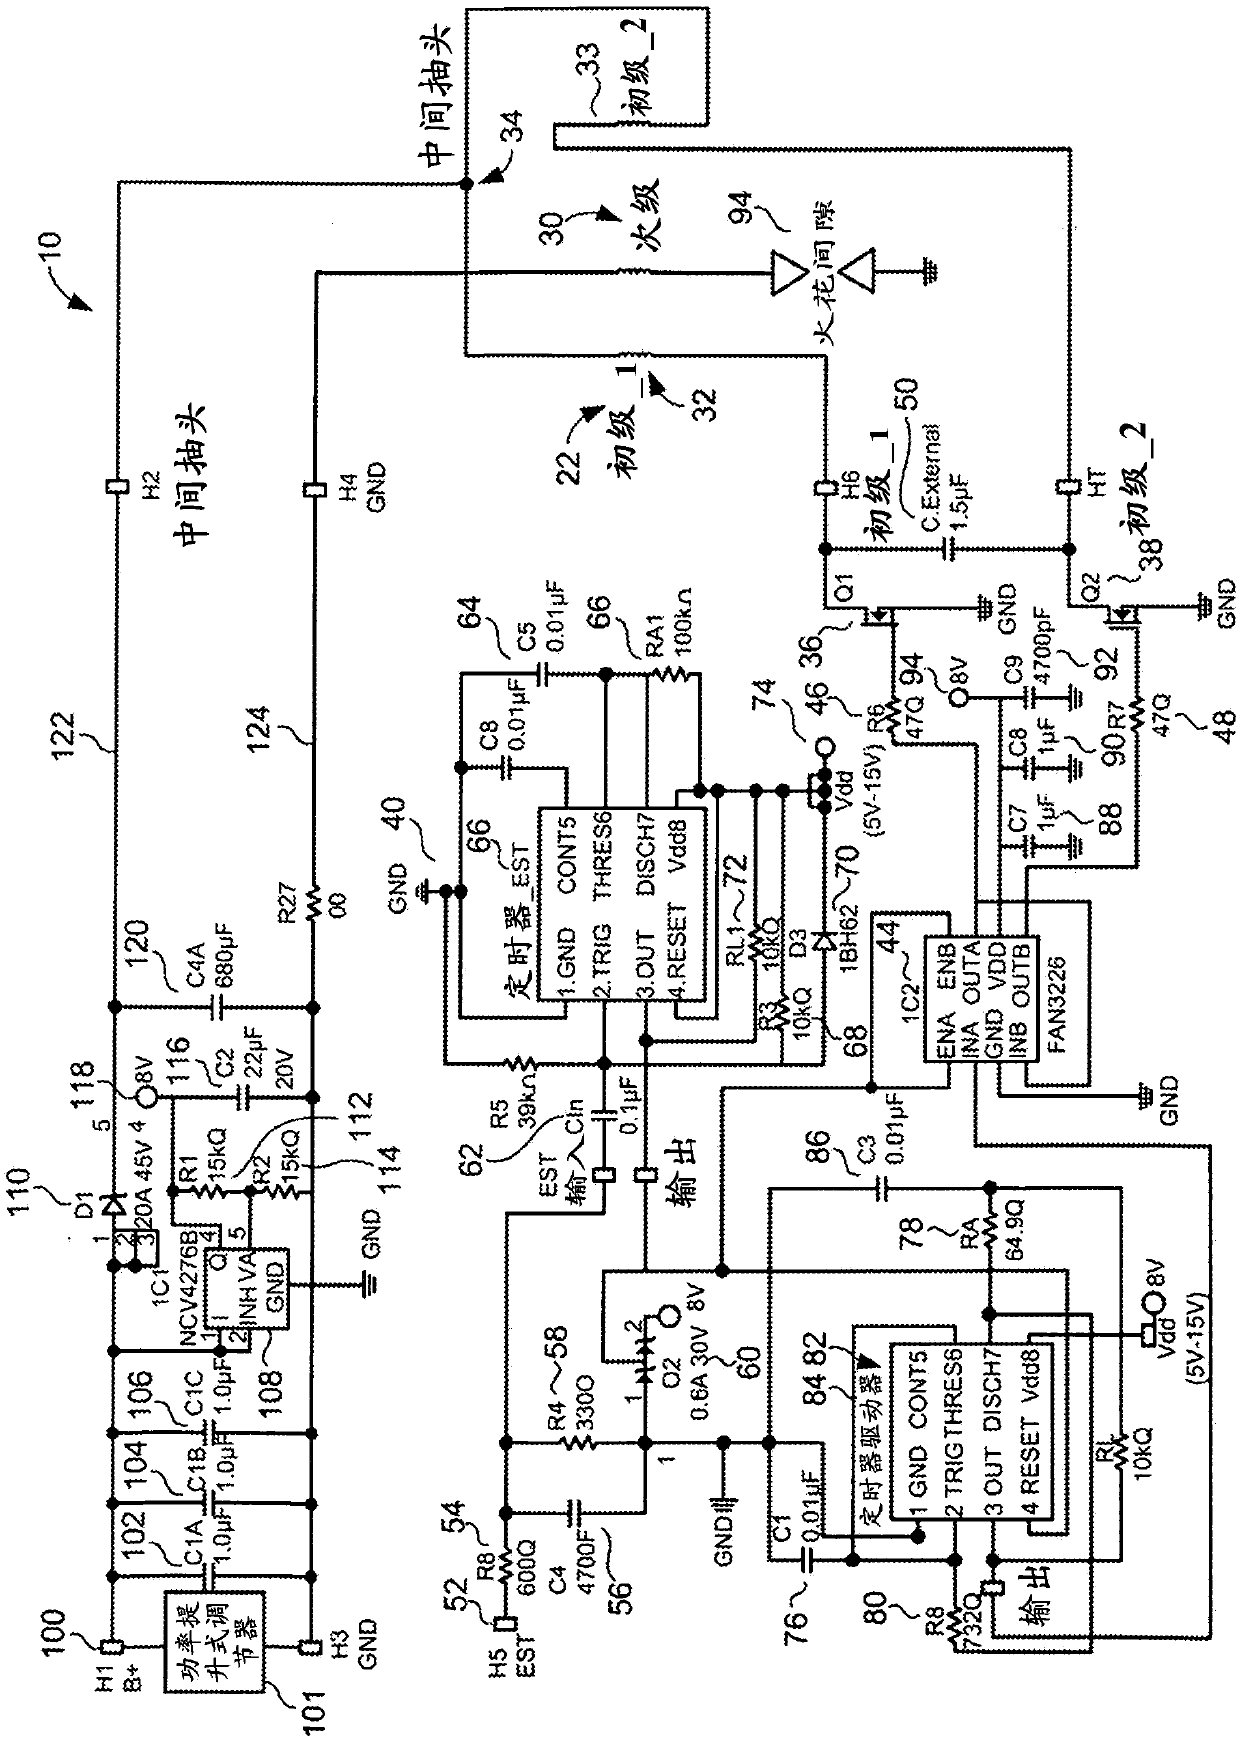 Forced frequency ignition system for internal combustion engines